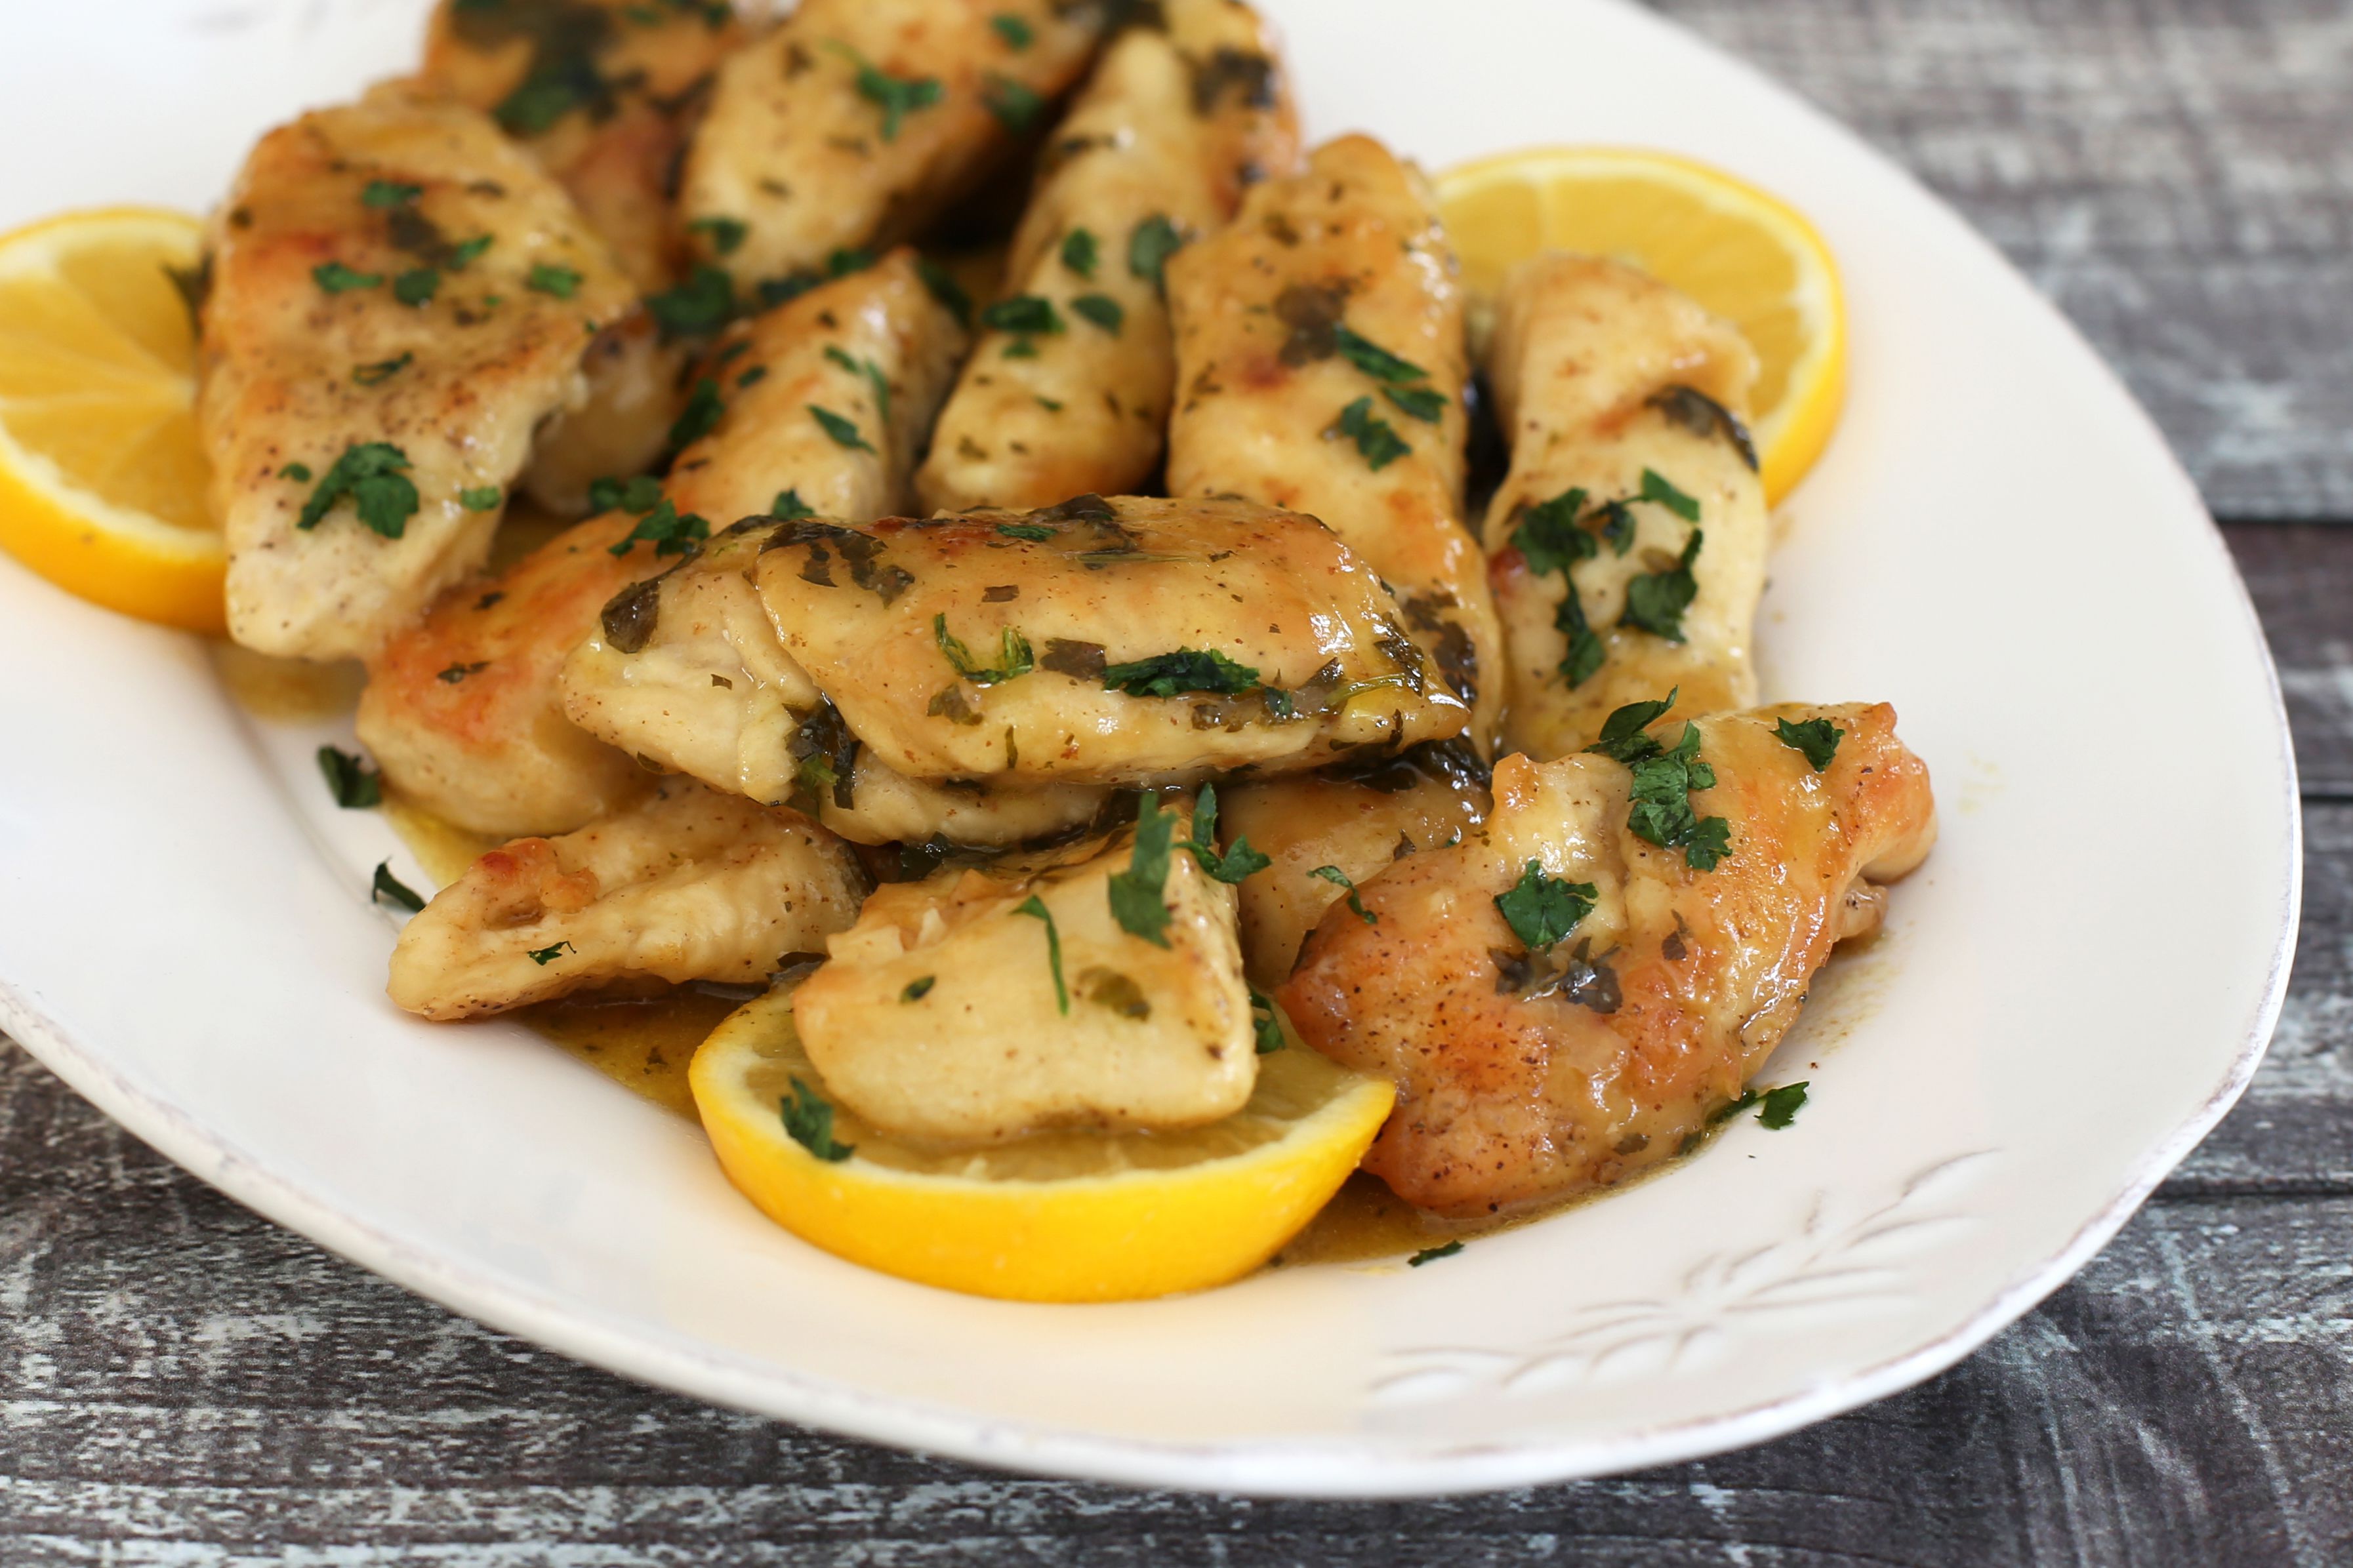 Chicken Piccata With Lemon and Parsley